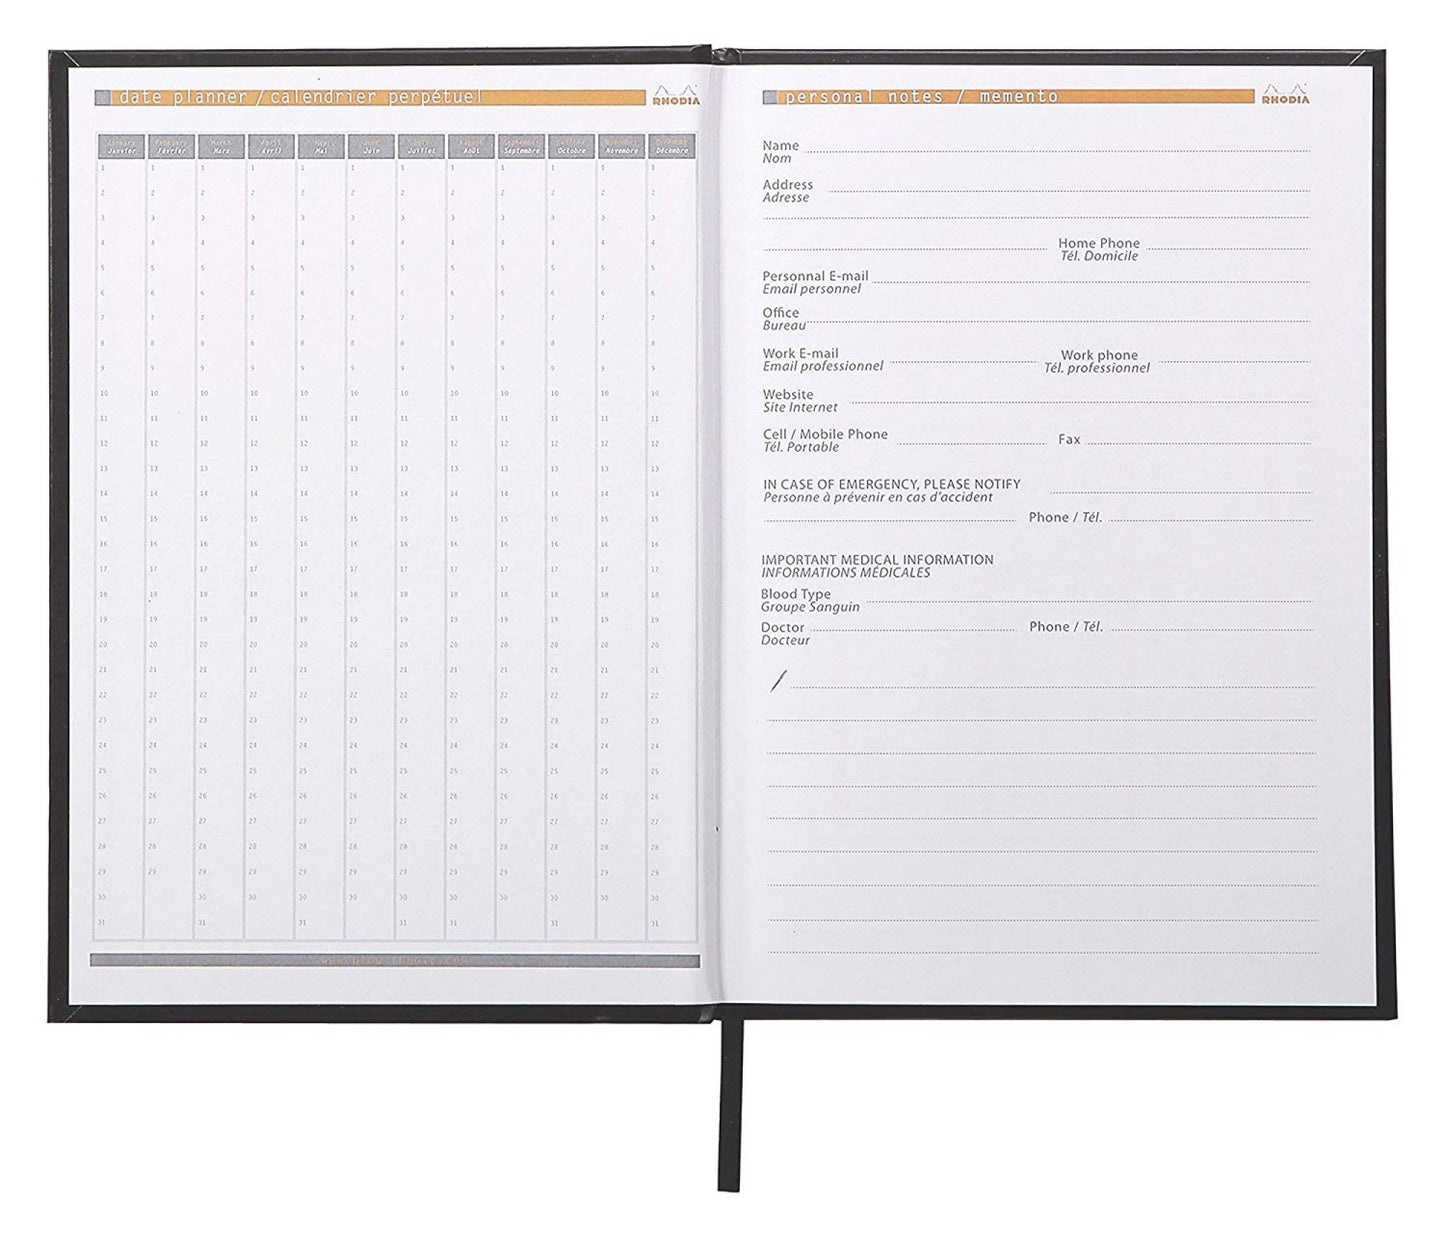 Rhodia Rhodiactive Hardcover A5 Lined - Black